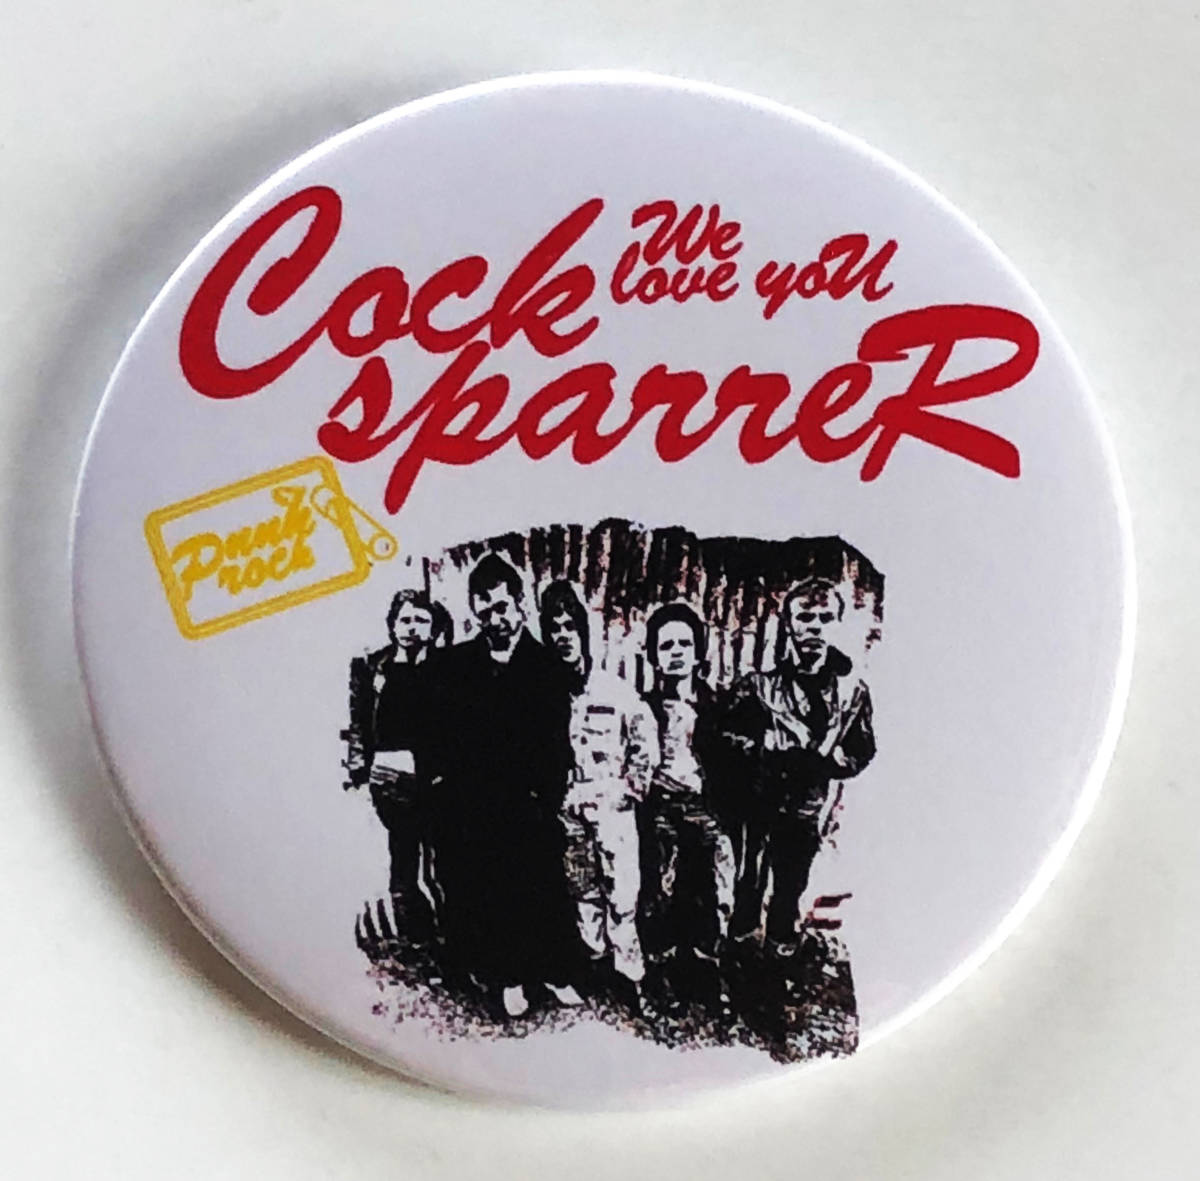 COCK SPARRER - We Love You 缶バッジ 54mm #UK #punk #70's cult killer punk rock #custom buttonsの画像1